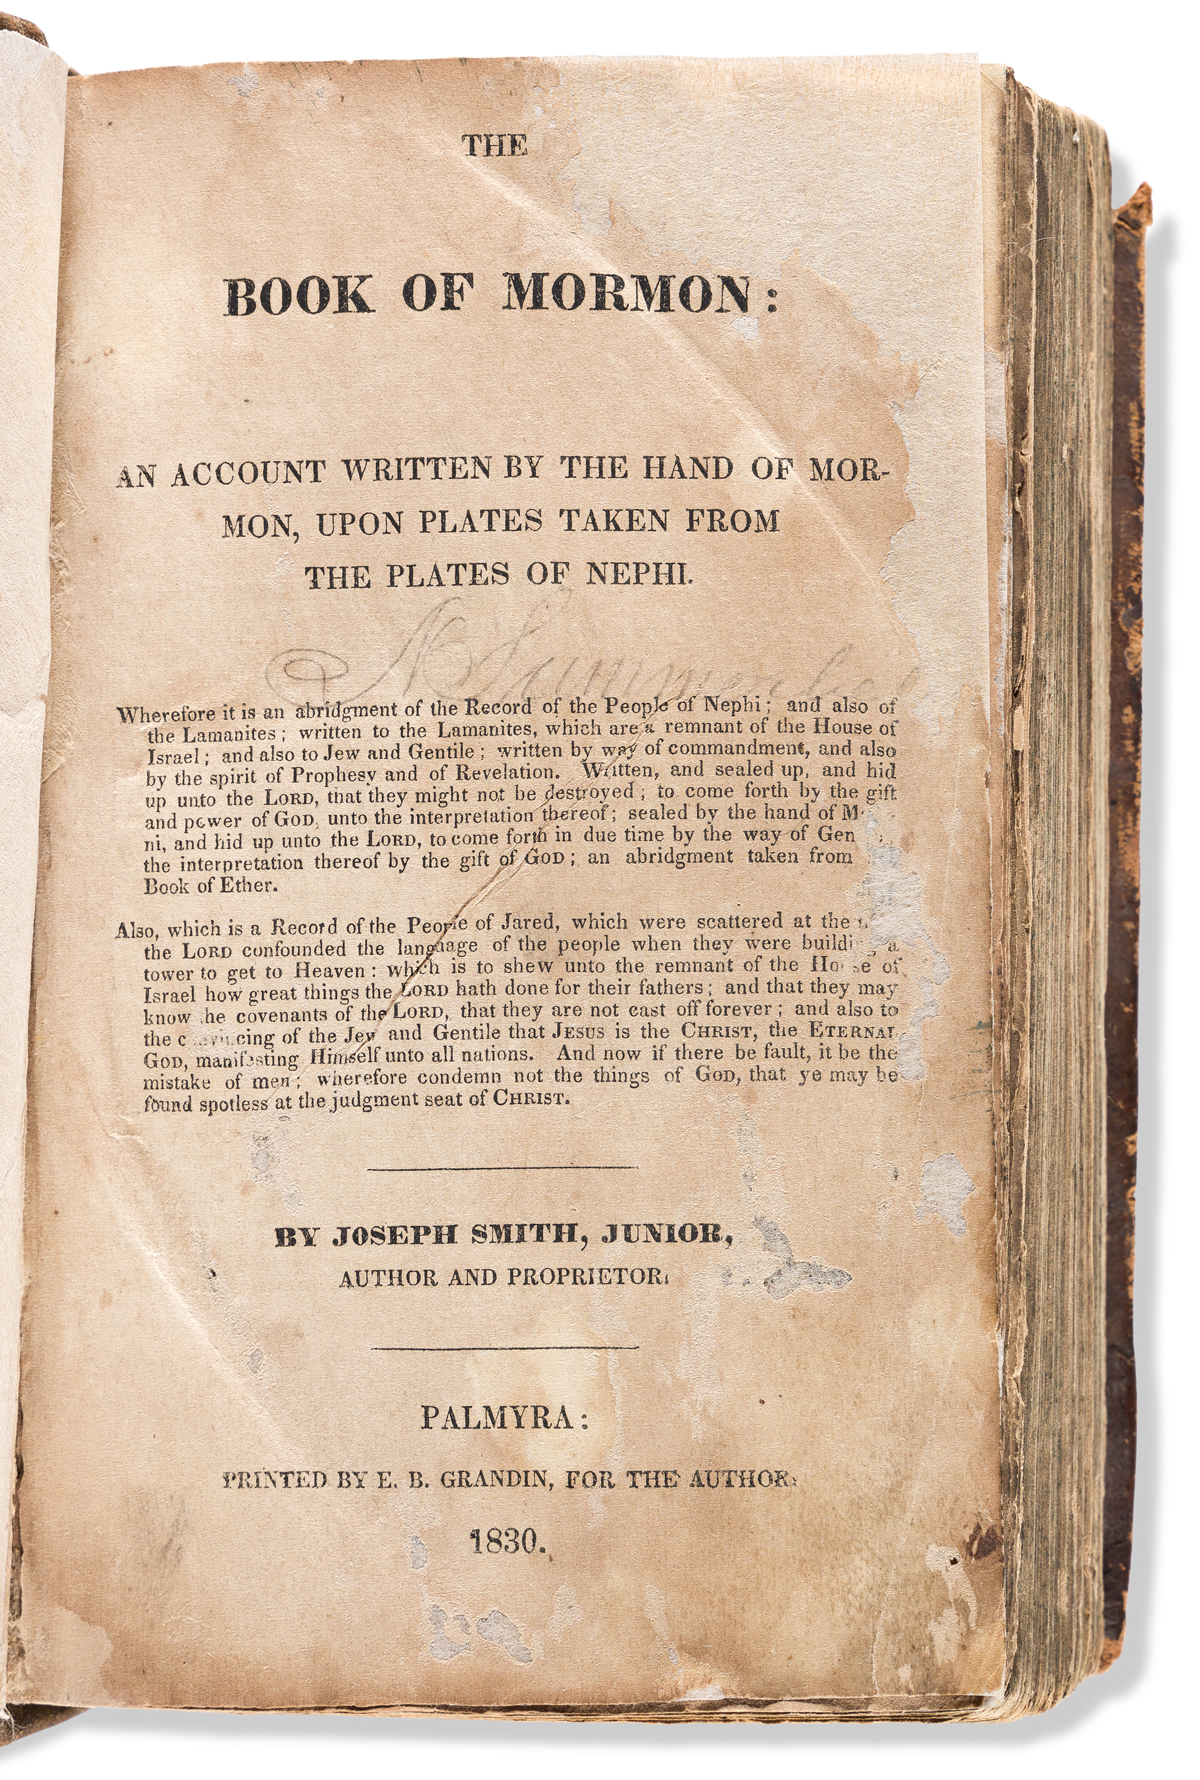 (MORMONS.) The Book of Mormon: An Account Written by the Hand of Mormon, upon Plates Taken from the Plates of Nephi.